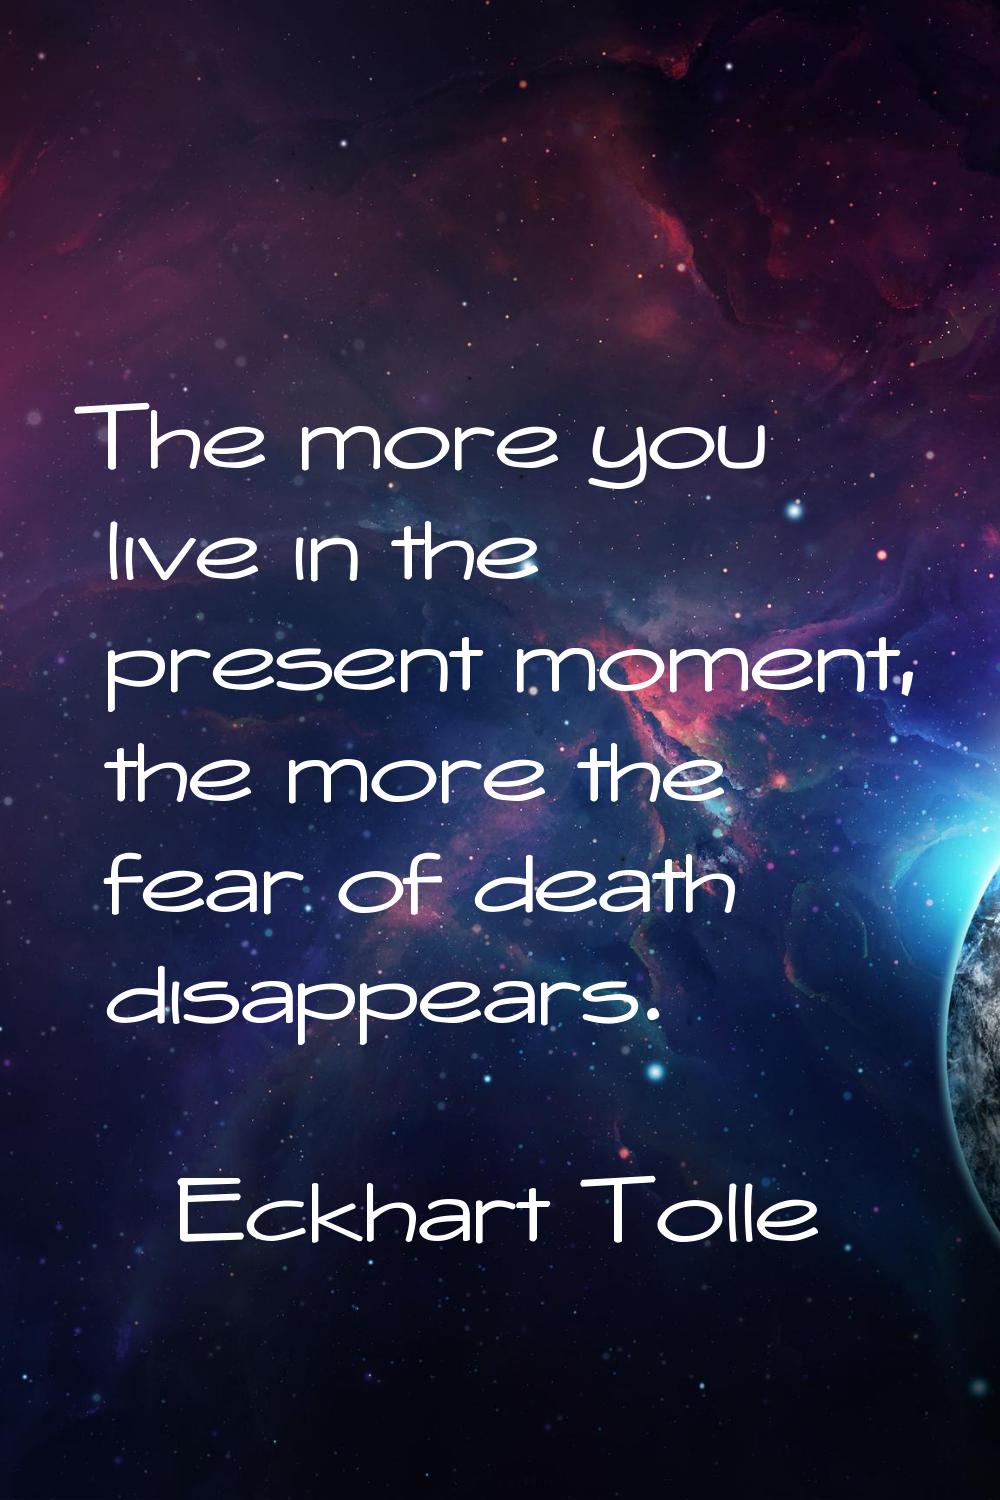 The more you live in the present moment, the more the fear of death disappears.